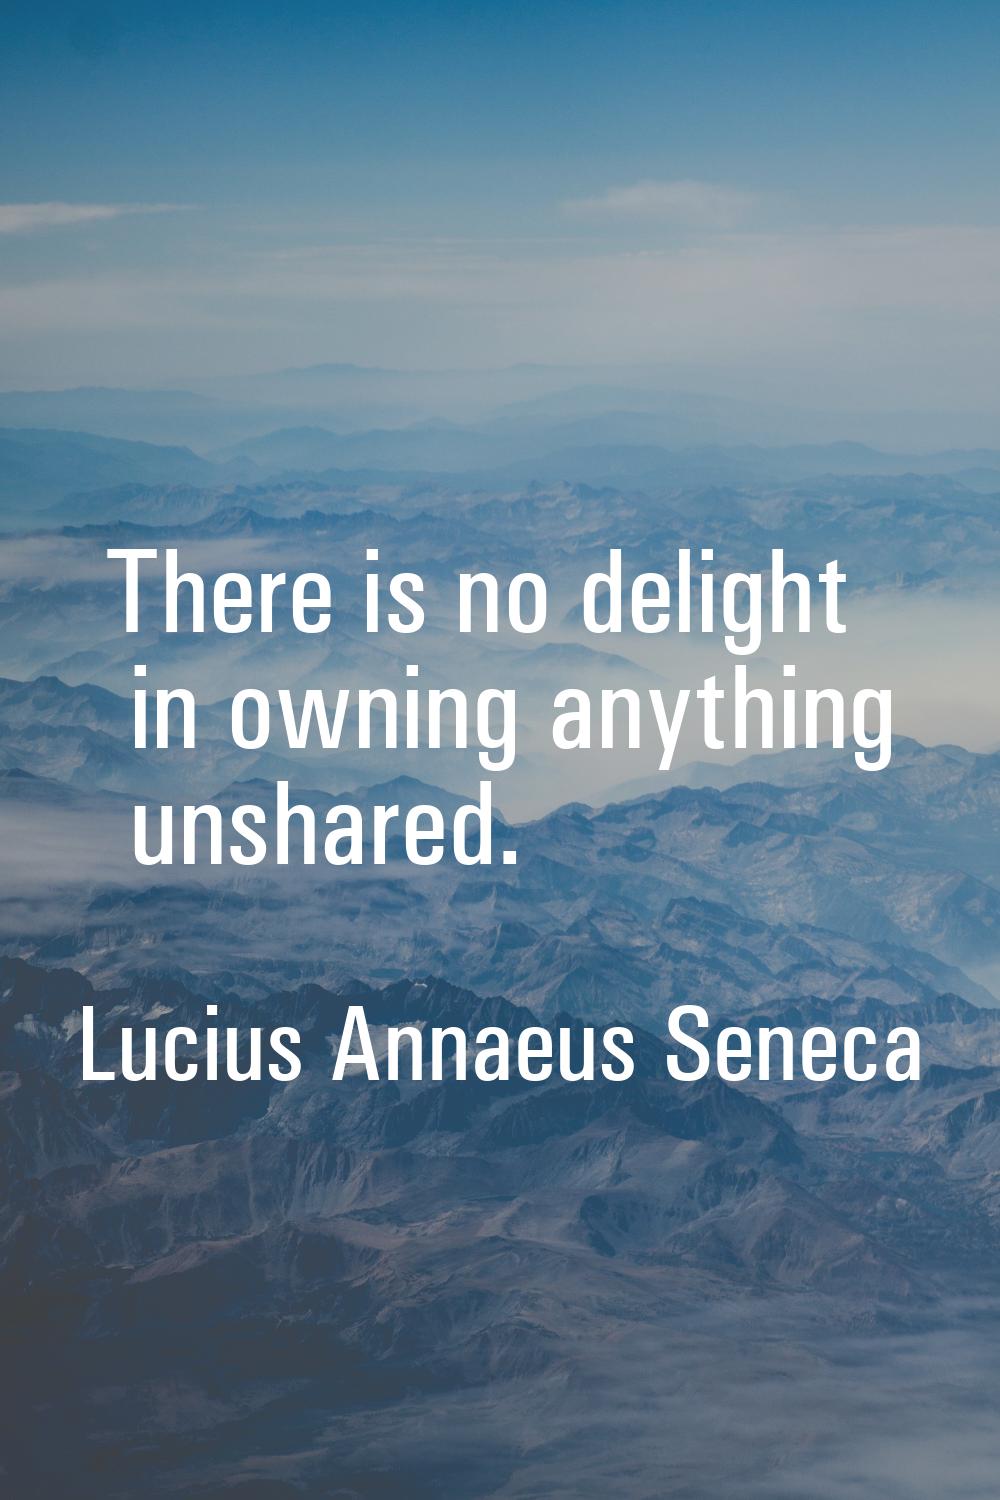 There is no delight in owning anything unshared.